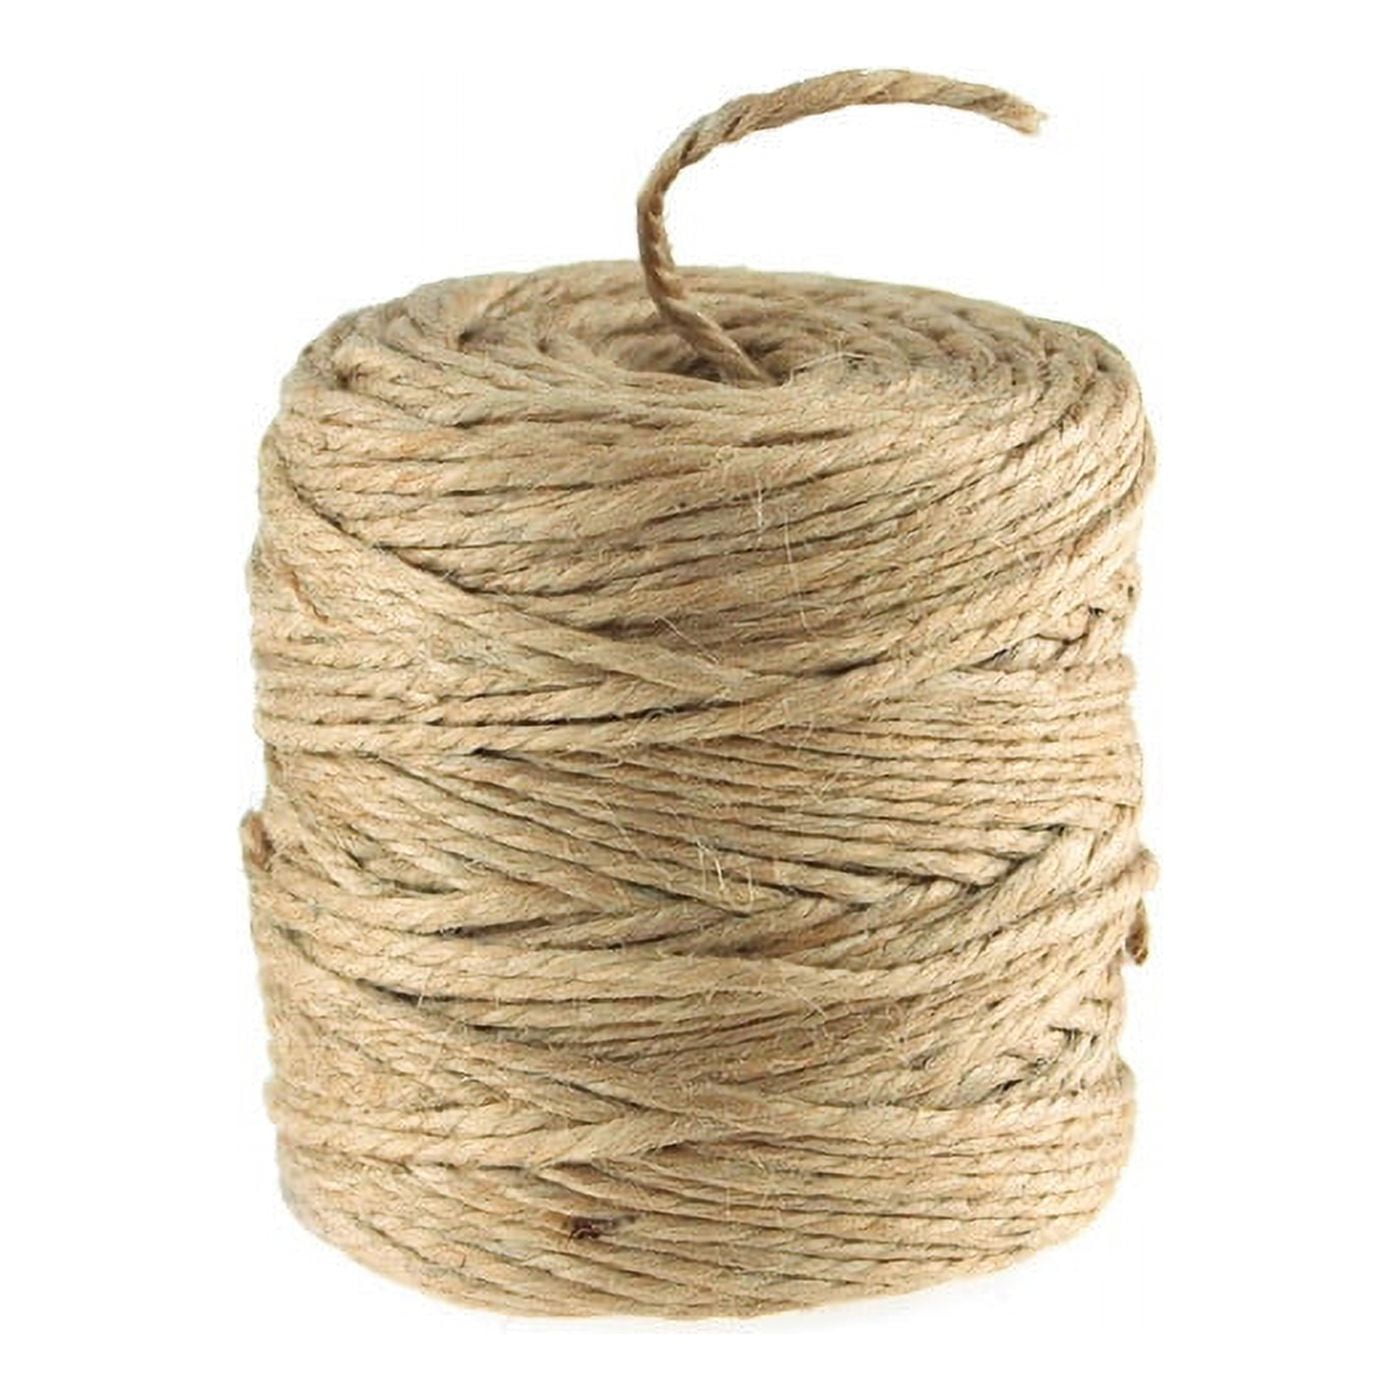 jijAcraft Jute Rope 3/8 inch, 33 Feet x 10mm Thick Jute Rope, Nautical  Rope, Heavy Duty Strong Jute Twine, Natural Thick Twine Rope for Crafts,  Cat